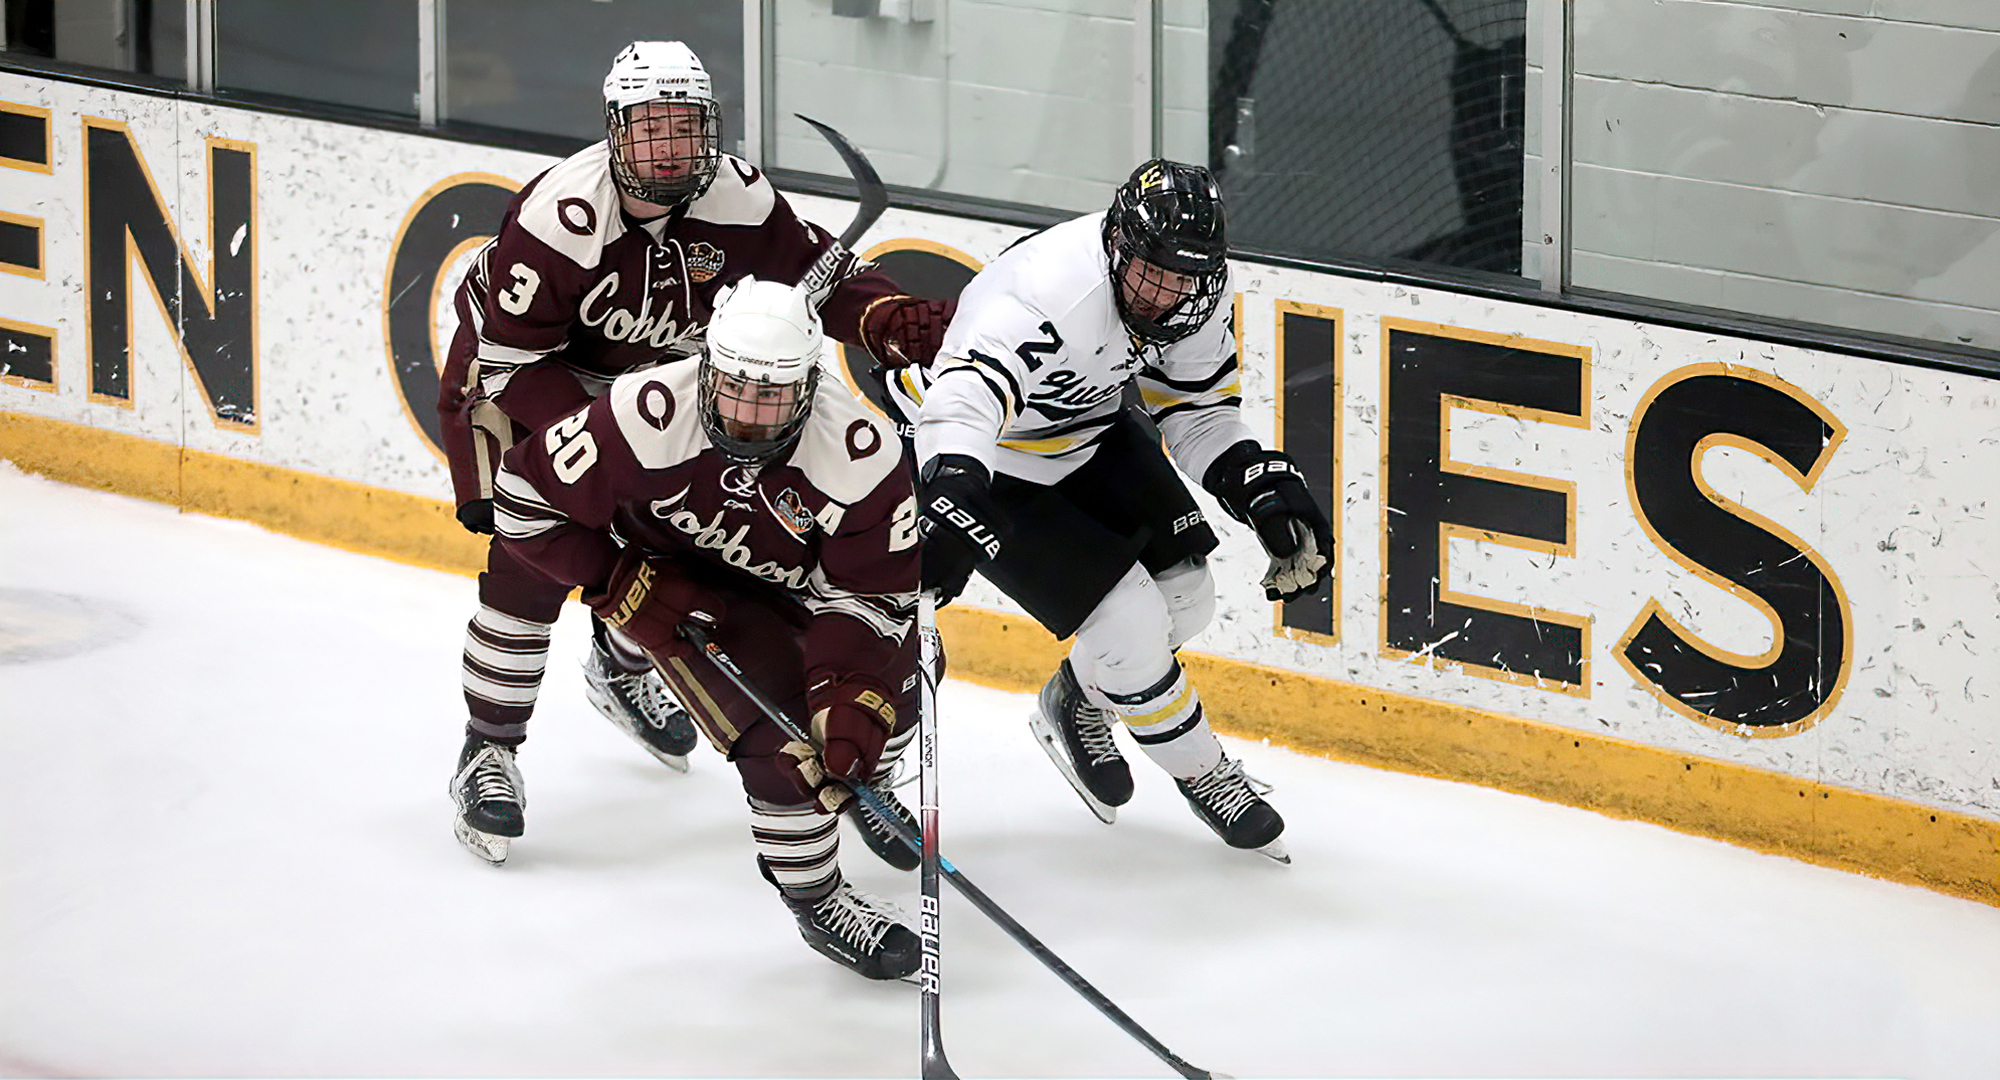 Hanson O'Leary carries the puck out from behind the net in the Cobbers' series finale at Gustavus. (Photo courtesy of Gustavus SID).